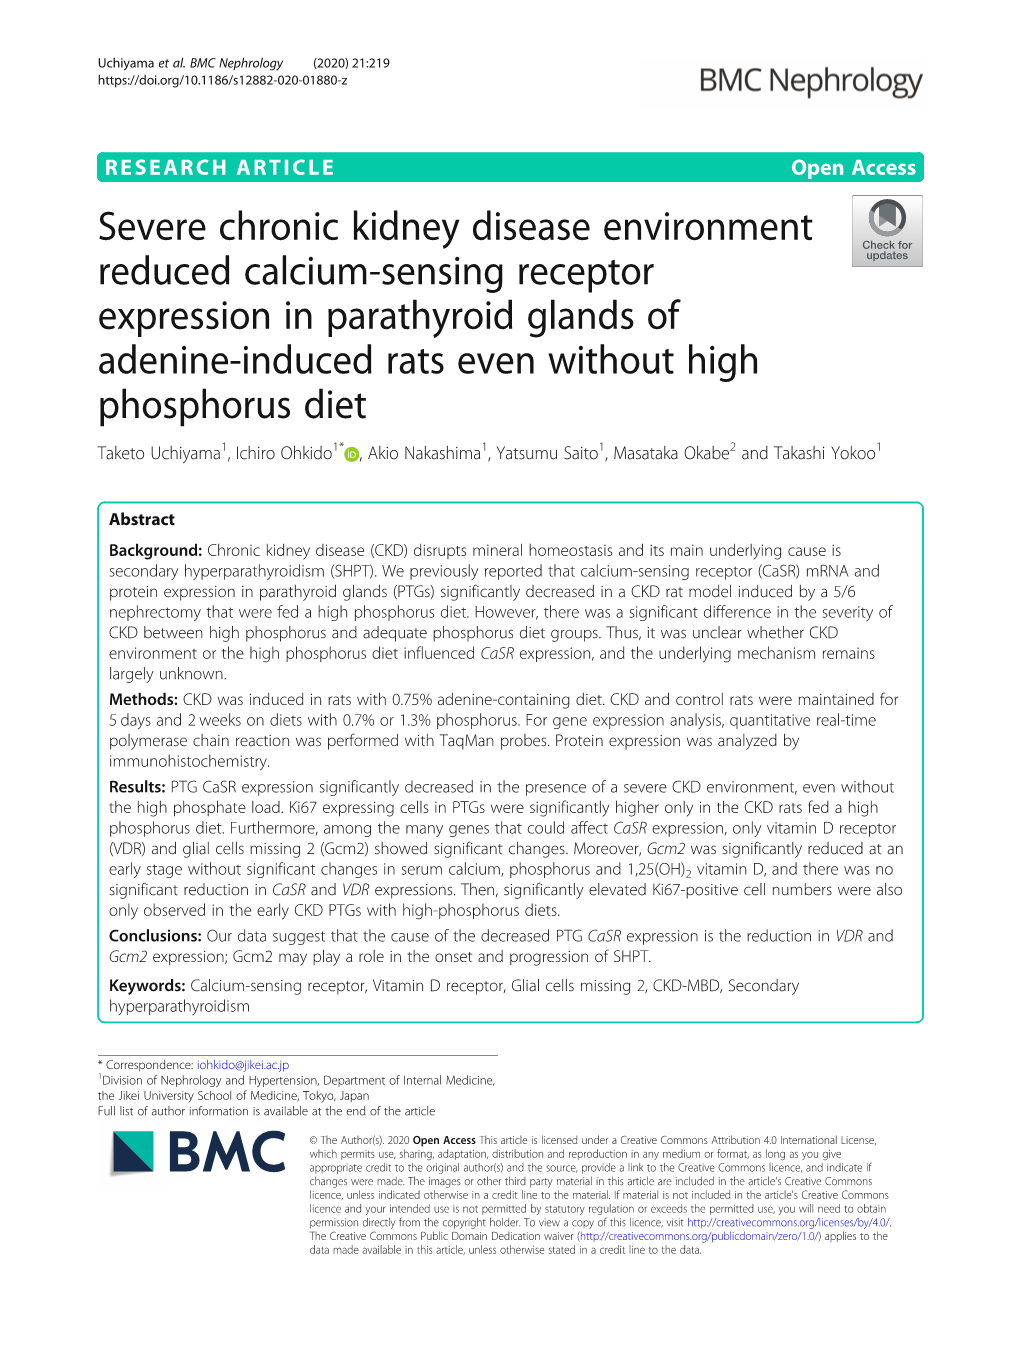 Severe Chronic Kidney Disease Environment Reduced Calcium-Sensing Receptor Expression in Parathyroid Glands of Adenine-Induced R